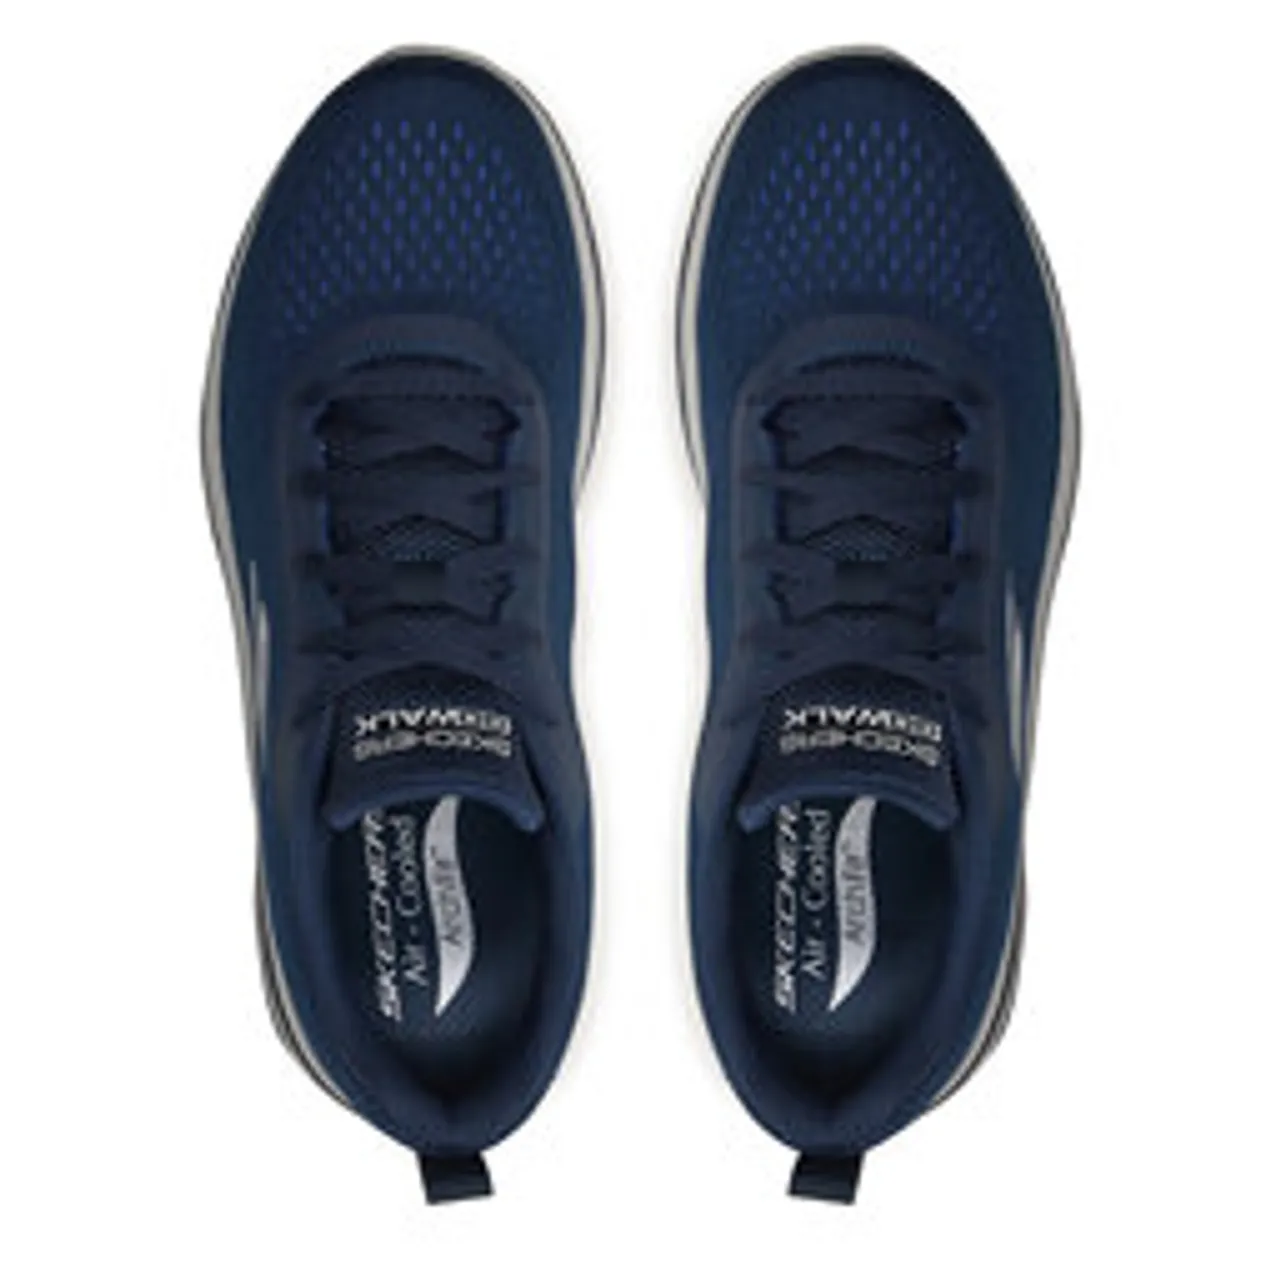 Sneakers Skechers Go Walk Arch Fit 2.0-Idyllic 2 216516/NVY Navy